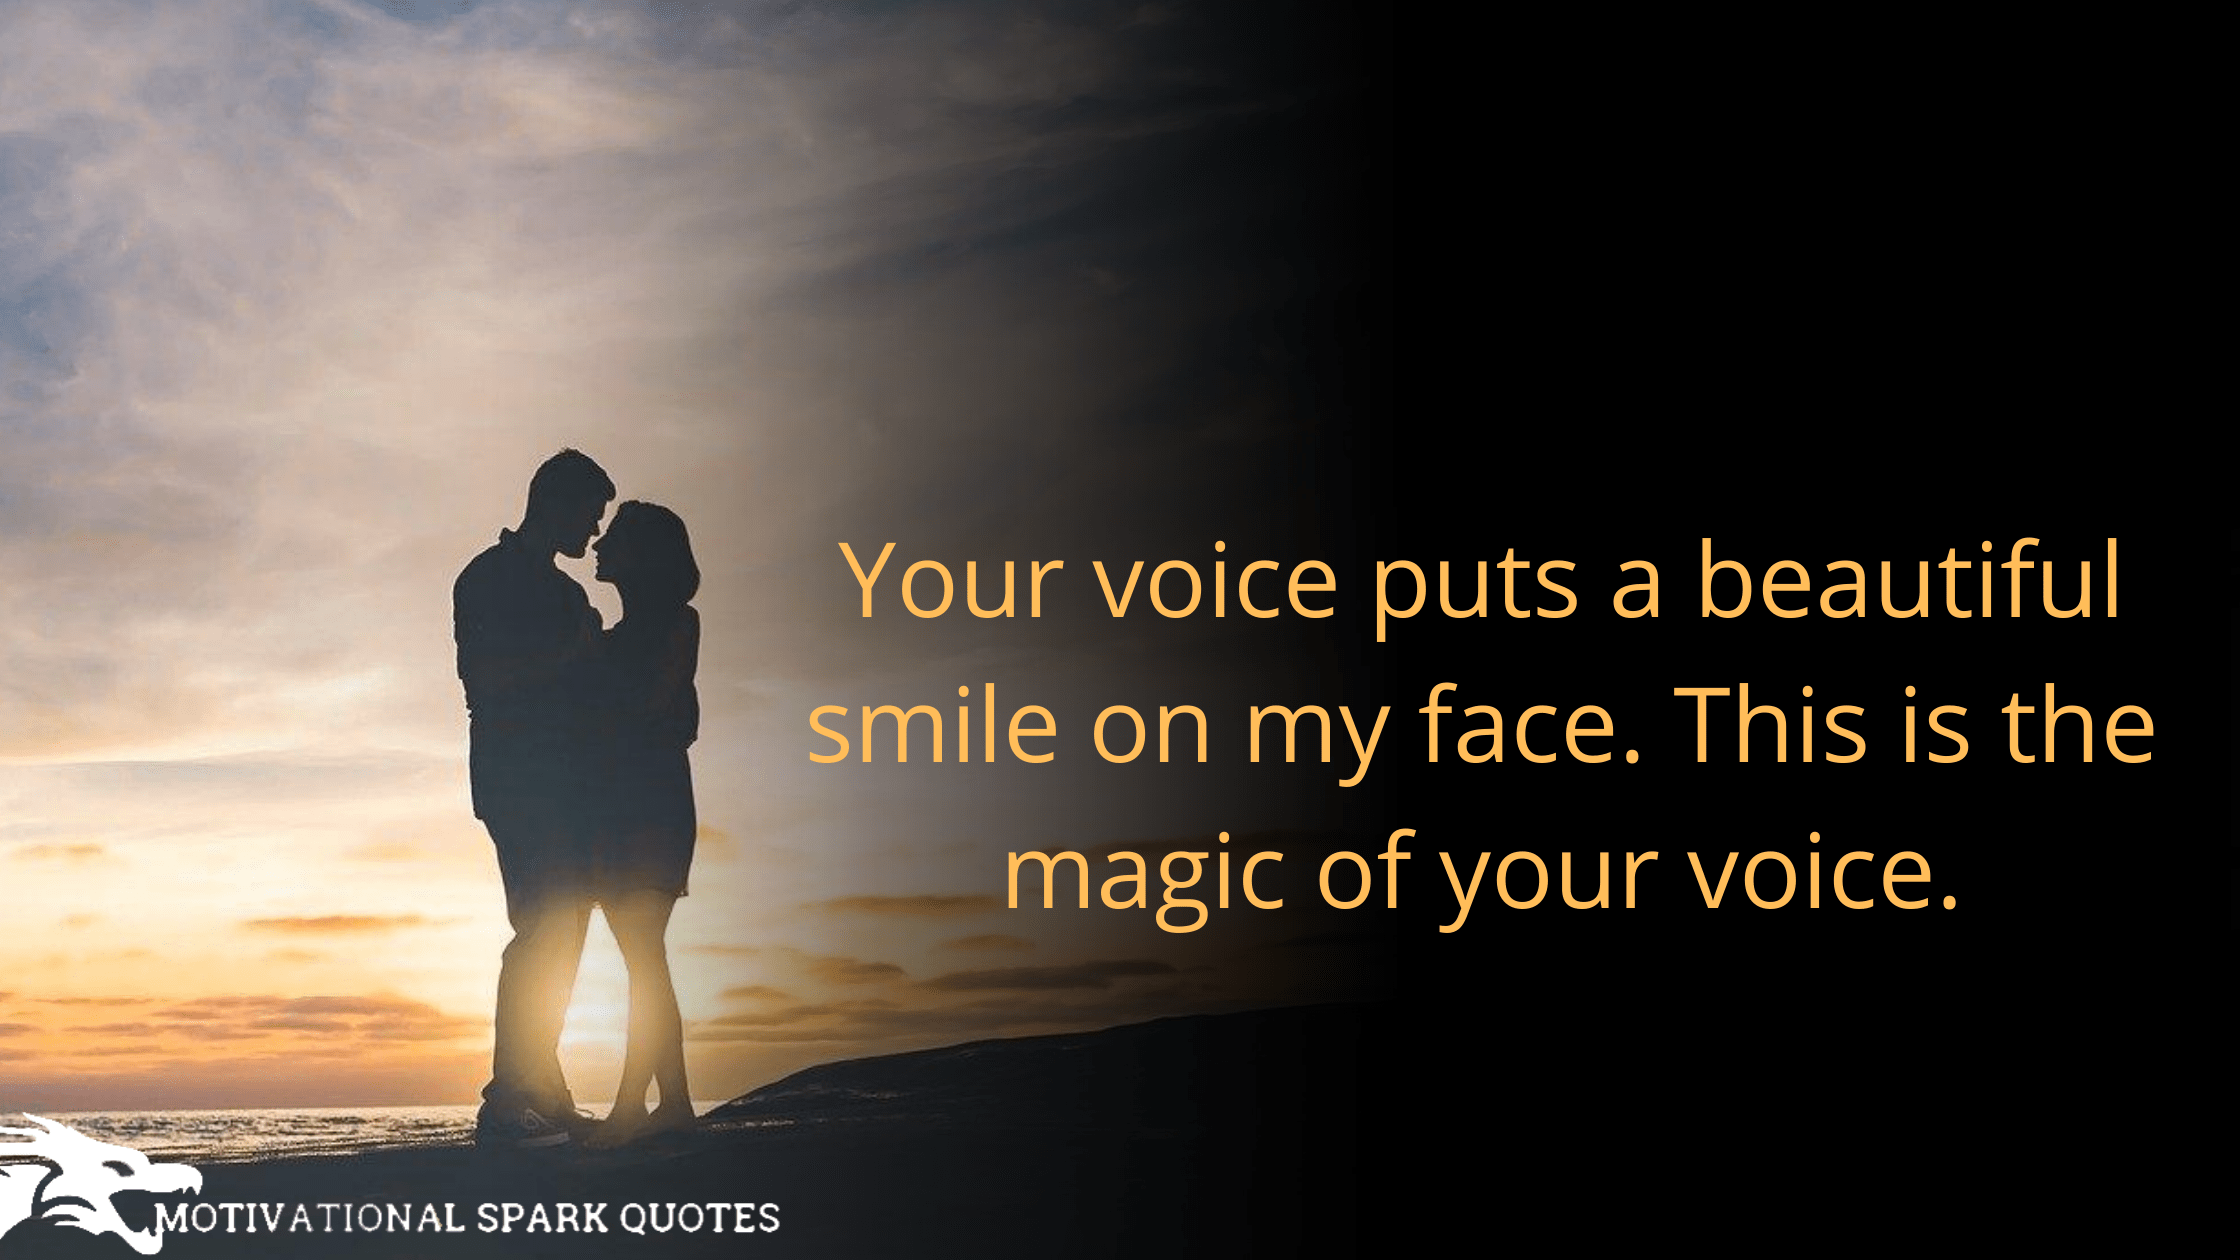 You are my world quotes